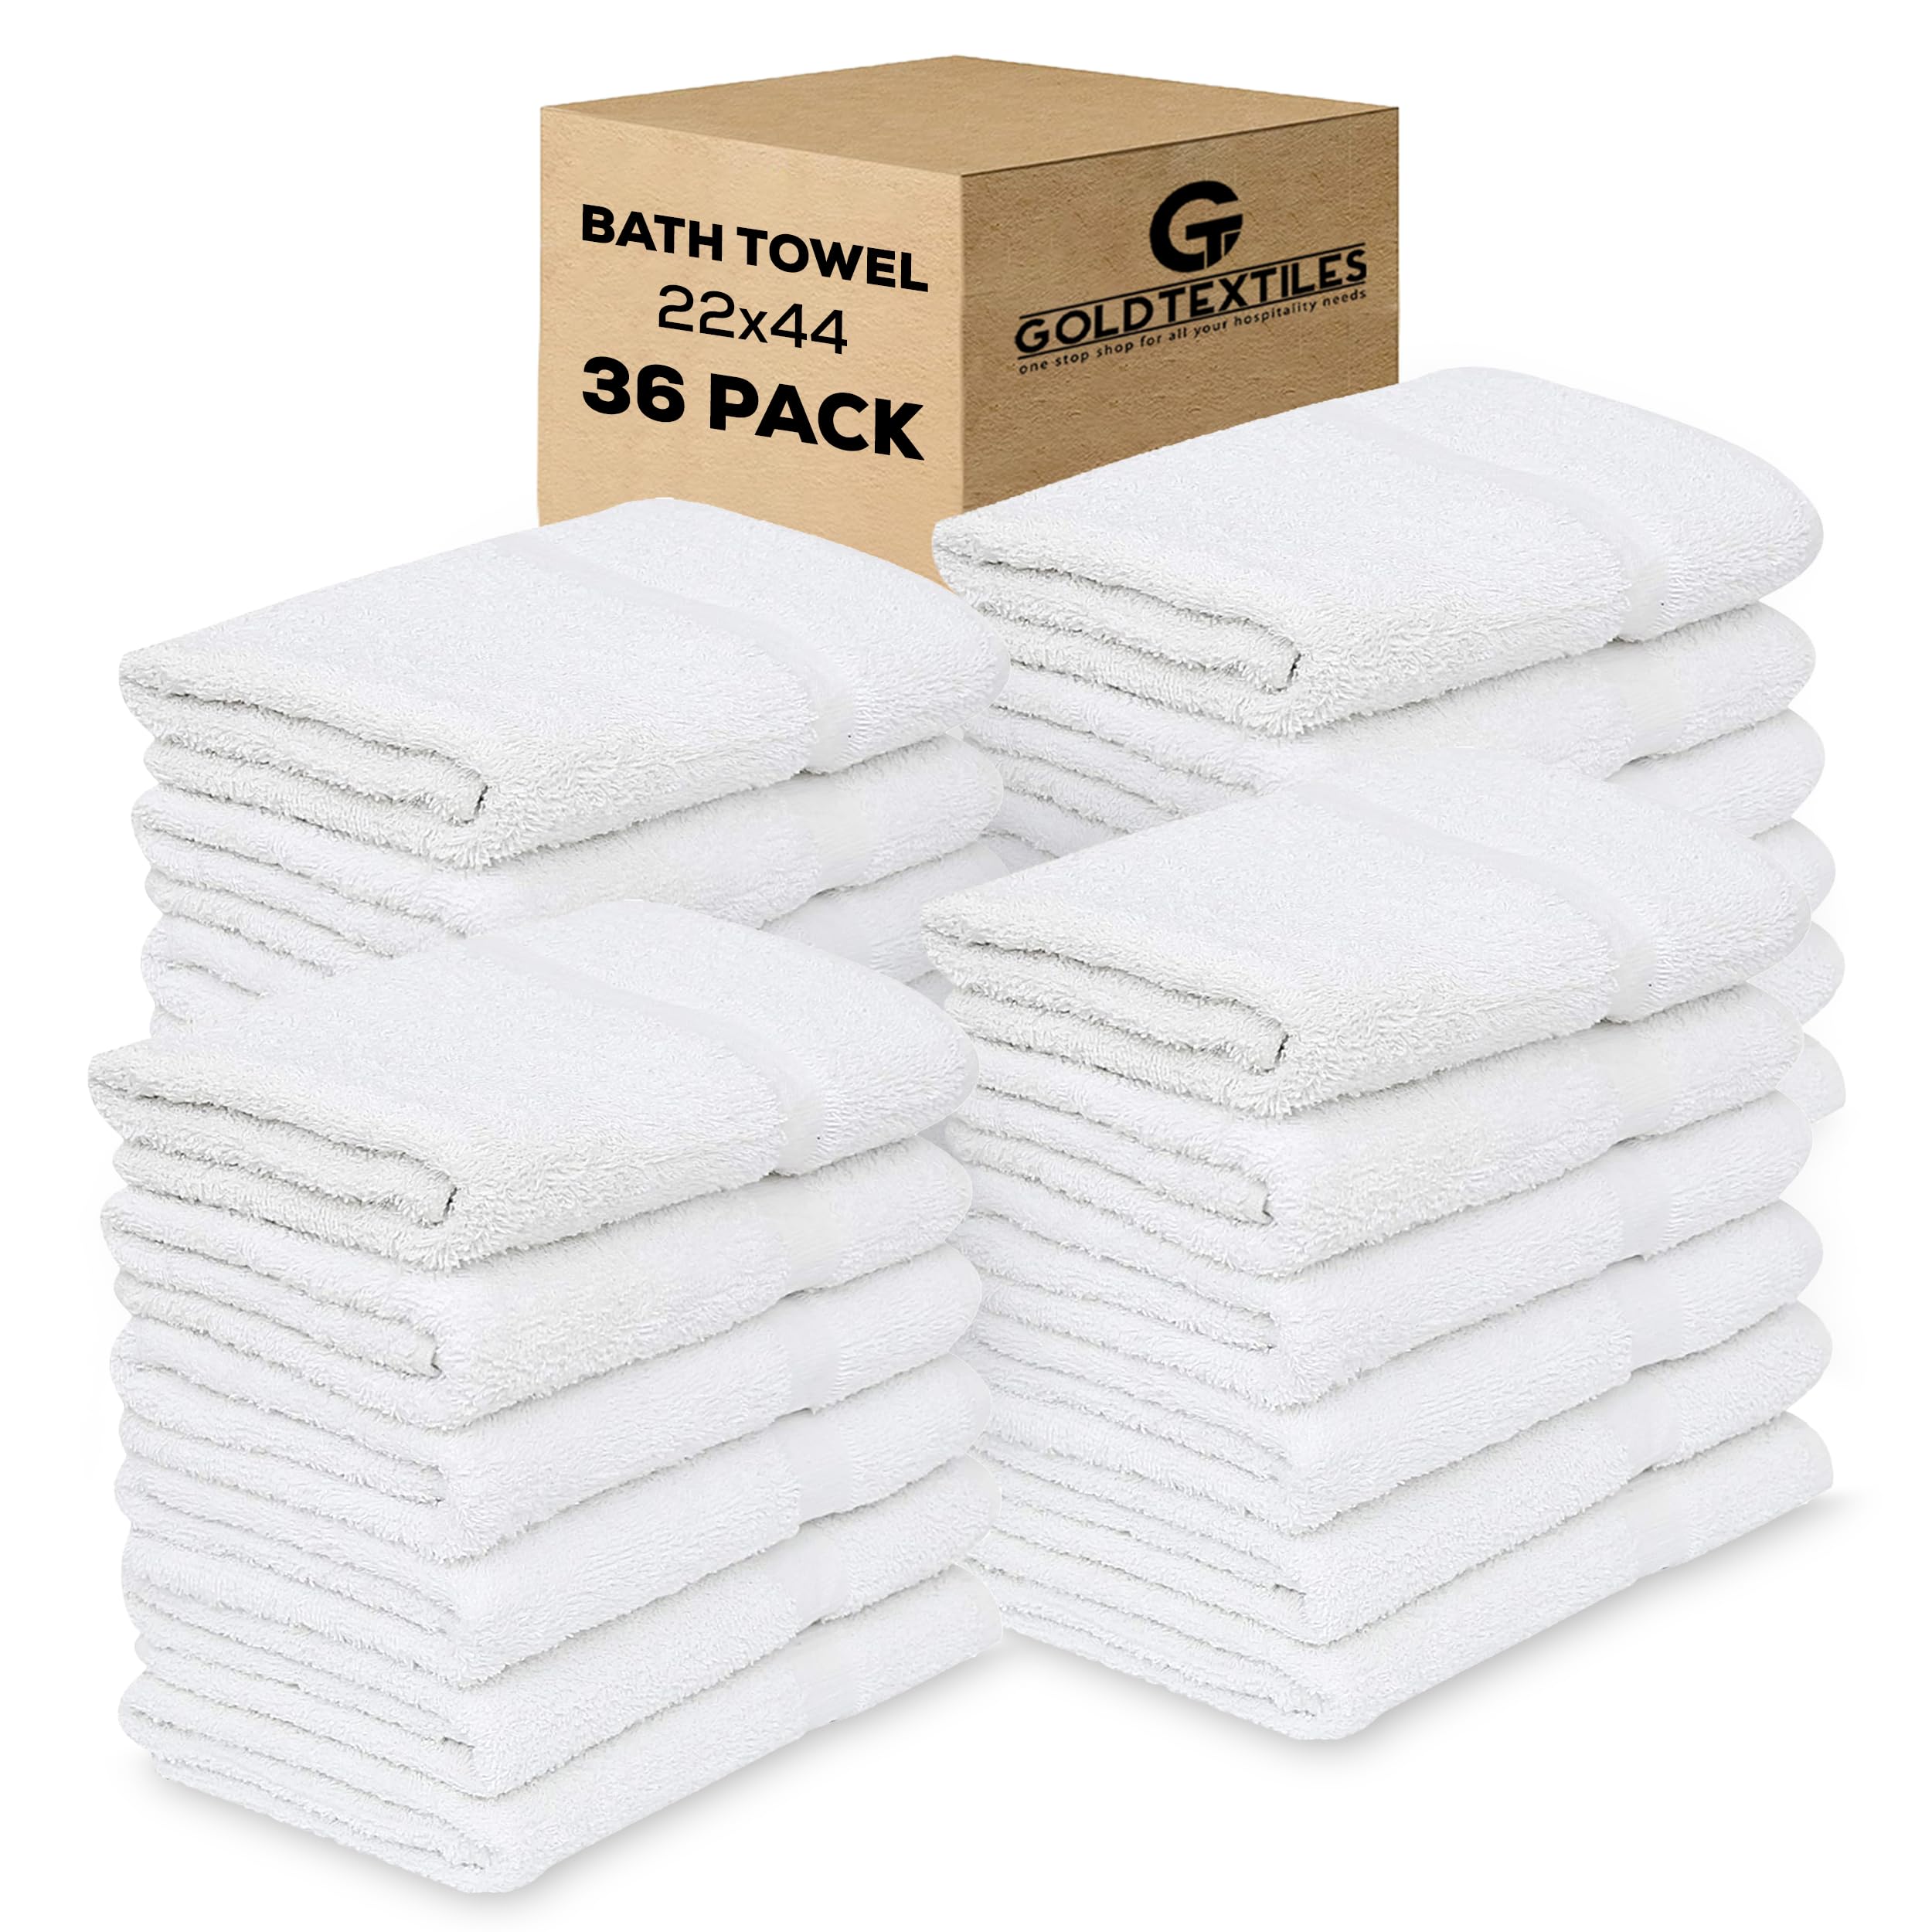 GOLD TEXTILES Bulk Bath Towels White 36 Pack (22x44 Inches) Economy Light Weight Easycare